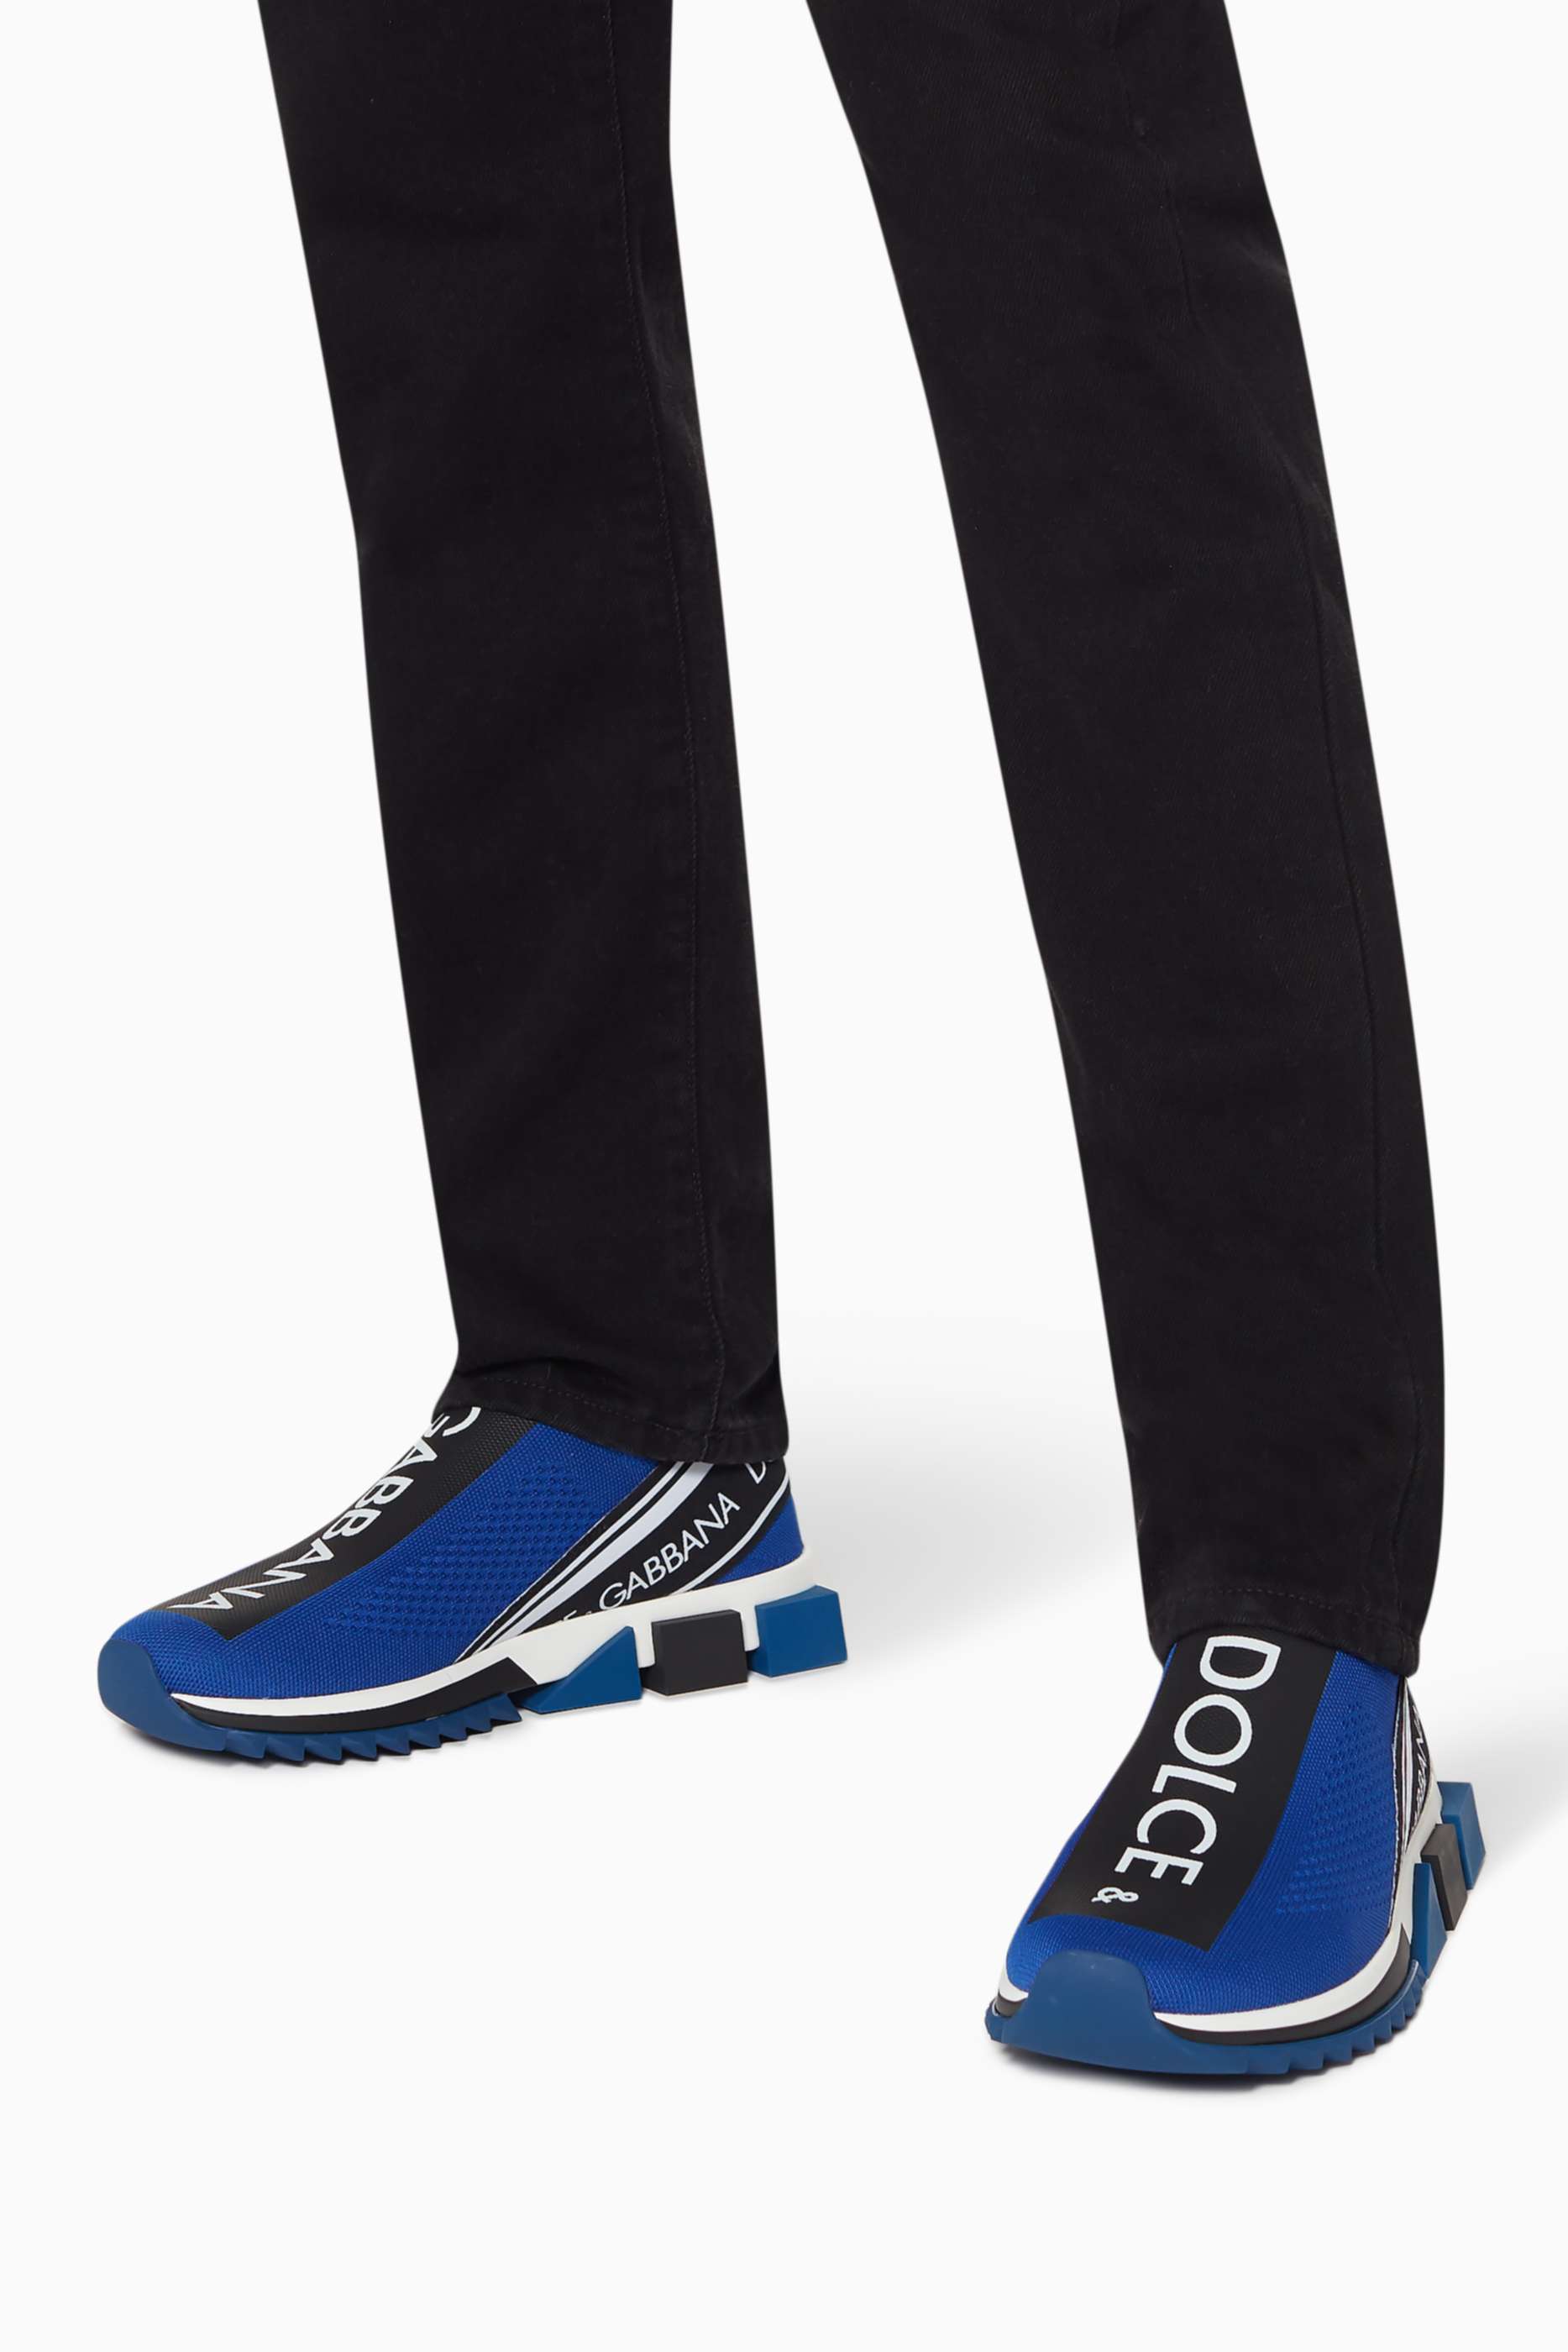 dolce and gabbana sorrento sneakers blue